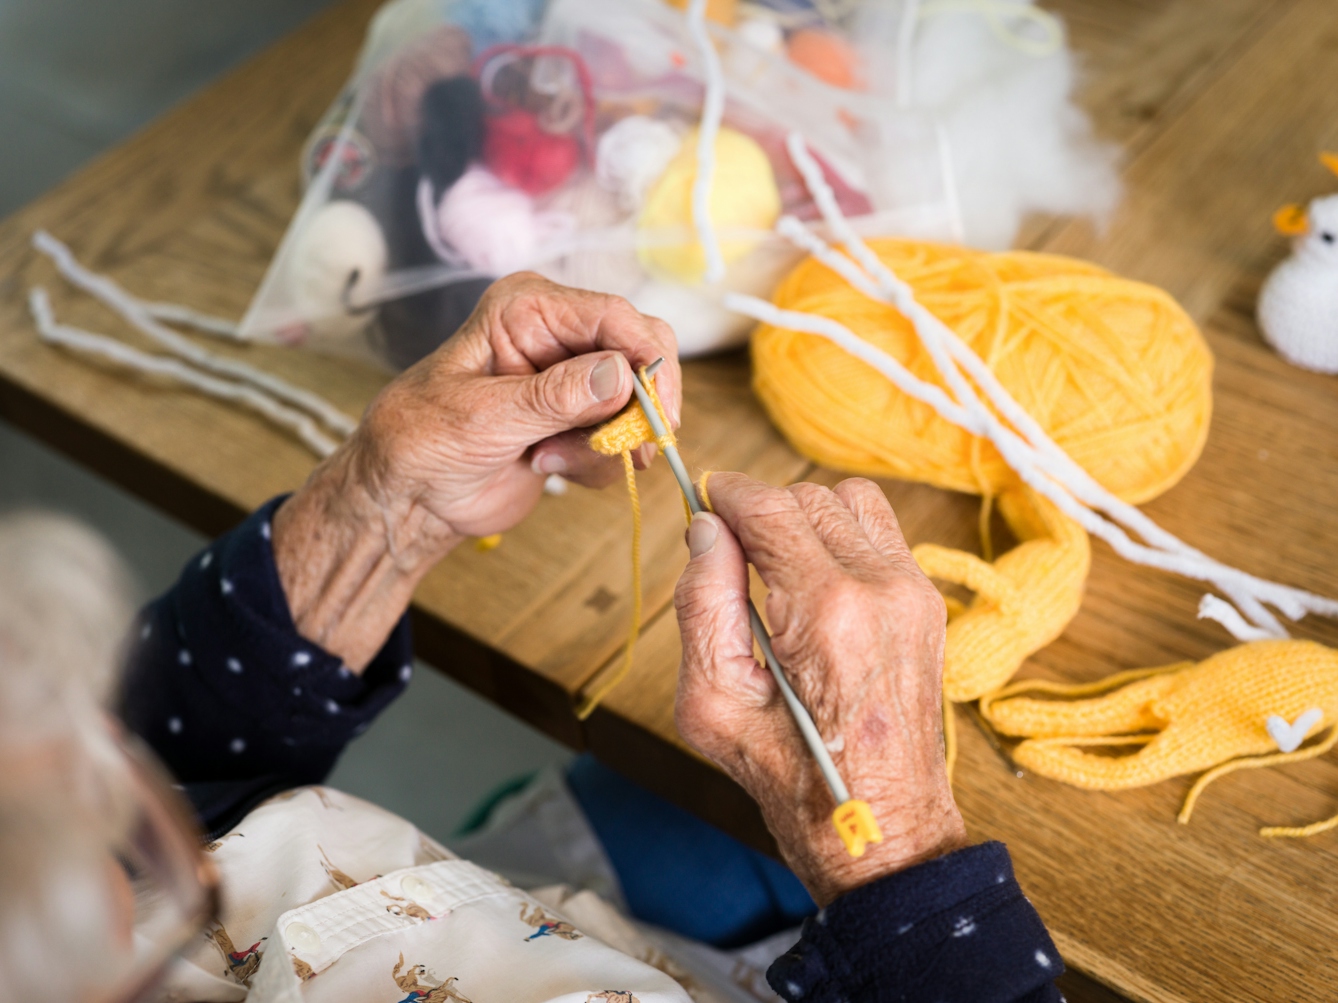 A photograph of the hands of an elderly woman knitting. They are holding two grey knitting needles and are making stitches with yellow wool. In the background is a ball of yellow wool and a bag containing small balls of wool in various colours.